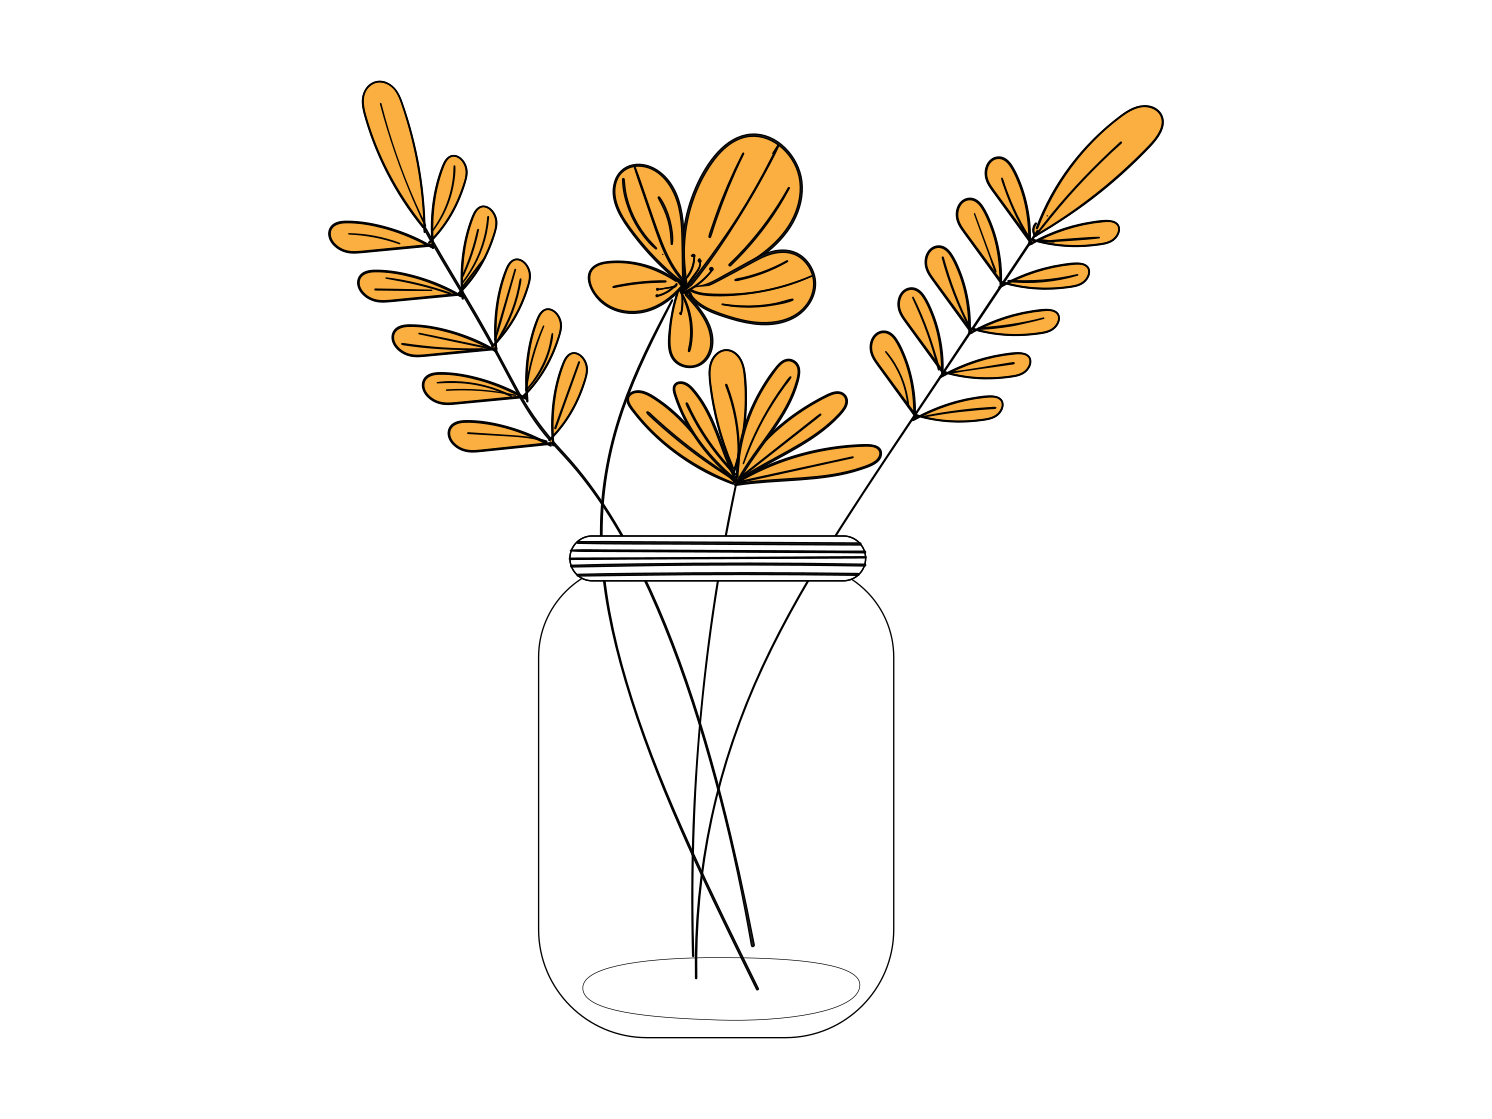 Yellow flowers in a jar